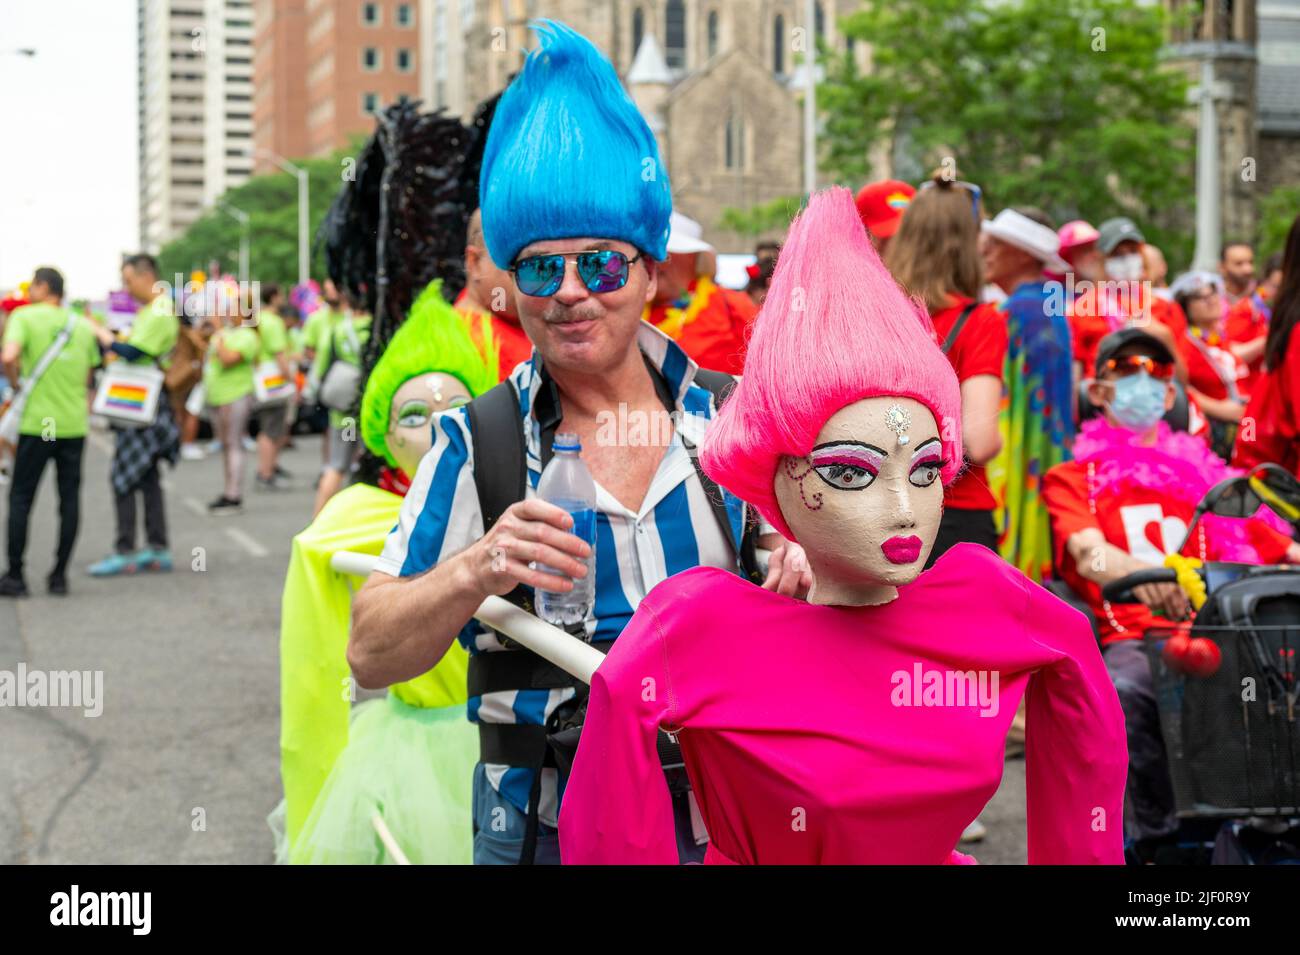 A person marching with two dolls in Bloor Street during Pride Parade Stock Photo